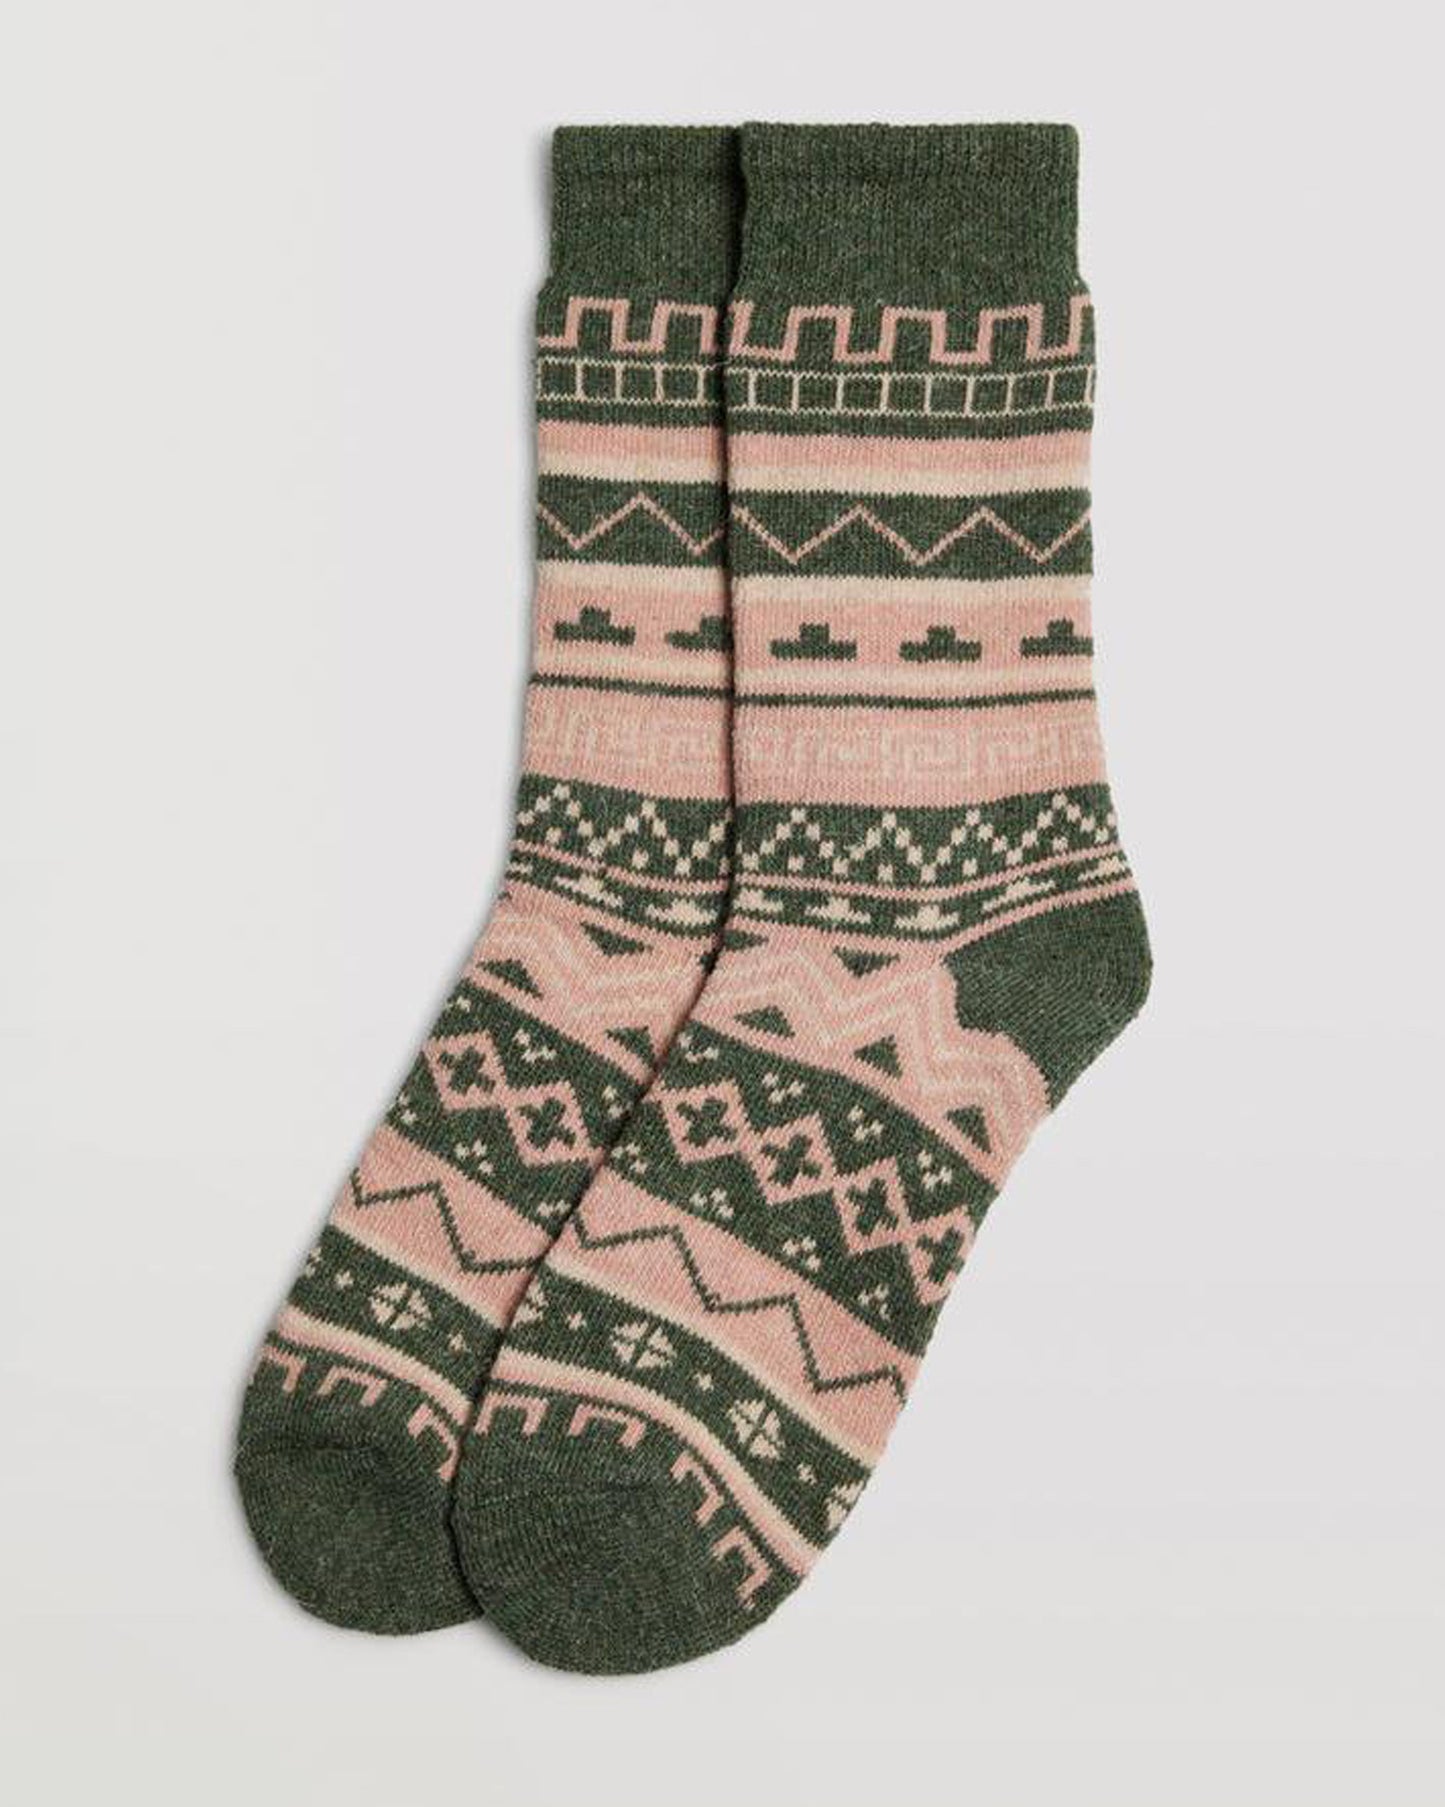 Ysabel Mora 12888 Aztec Socks - Sage green warm wool and angora mix thermal socks with an Aztec style pattern in shades of pale peach.